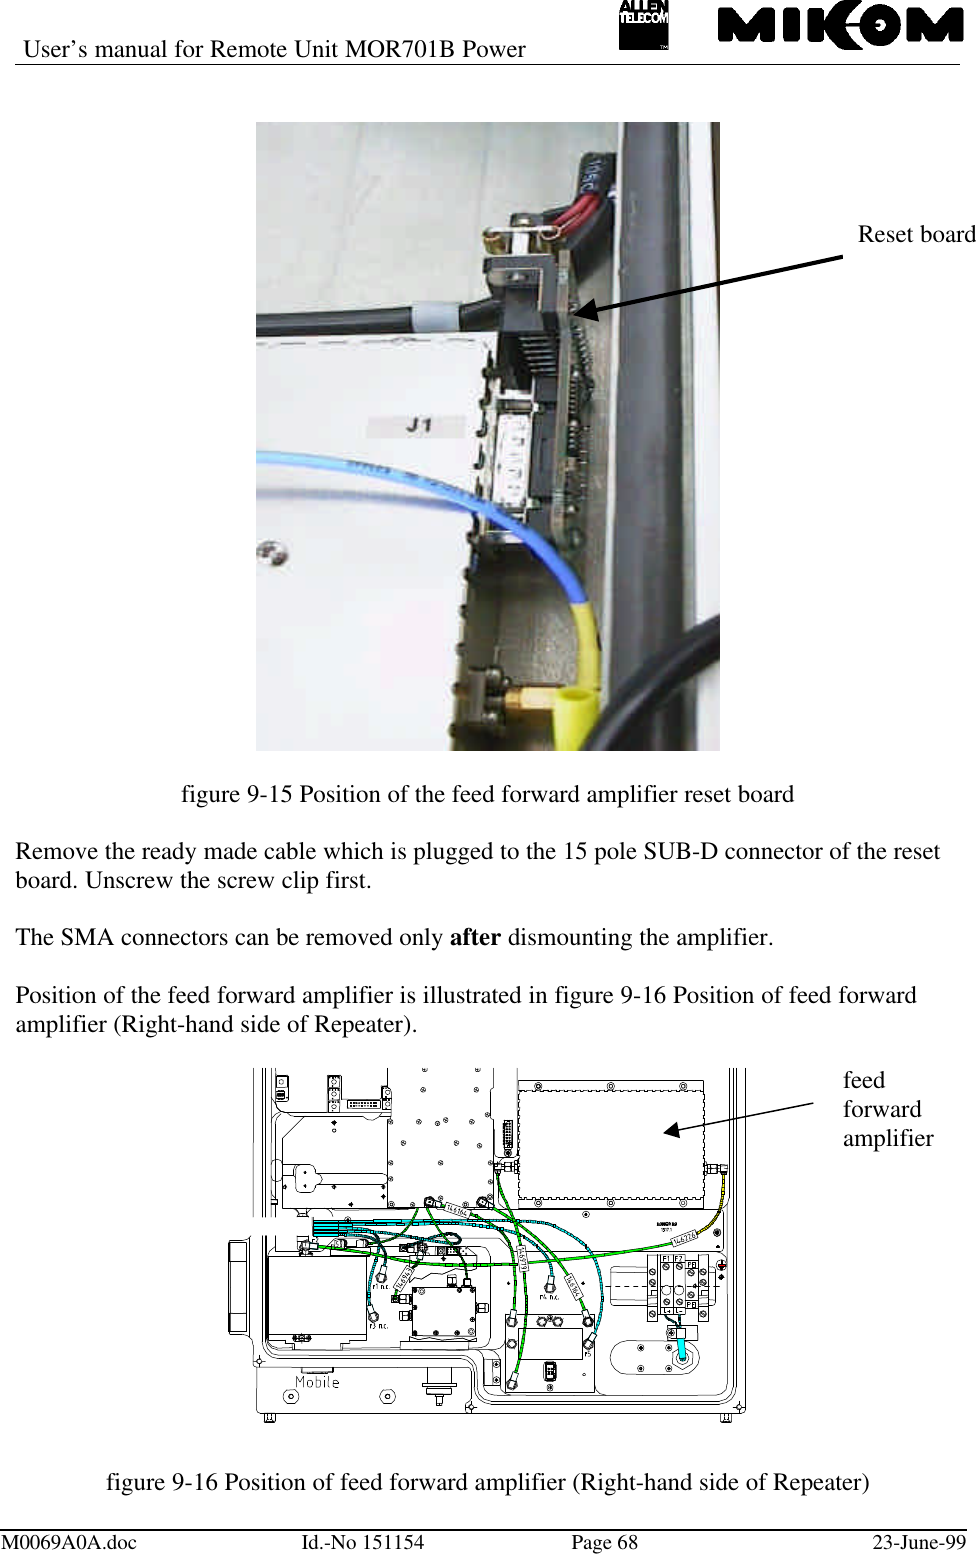 User’s manual for Remote Unit MOR701B PowerM0069A0A.doc Id.-No 151154 Page 68 23-June-99figure 9-15 Position of the feed forward amplifier reset boardRemove the ready made cable which is plugged to the 15 pole SUB-D connector of the resetboard. Unscrew the screw clip first.The SMA connectors can be removed only after dismounting the amplifier.Position of the feed forward amplifier is illustrated in figure 9-16 Position of feed forwardamplifier (Right-hand side of Repeater).figure 9-16 Position of feed forward amplifier (Right-hand side of Repeater)Reset boardfeedforwardamplifier